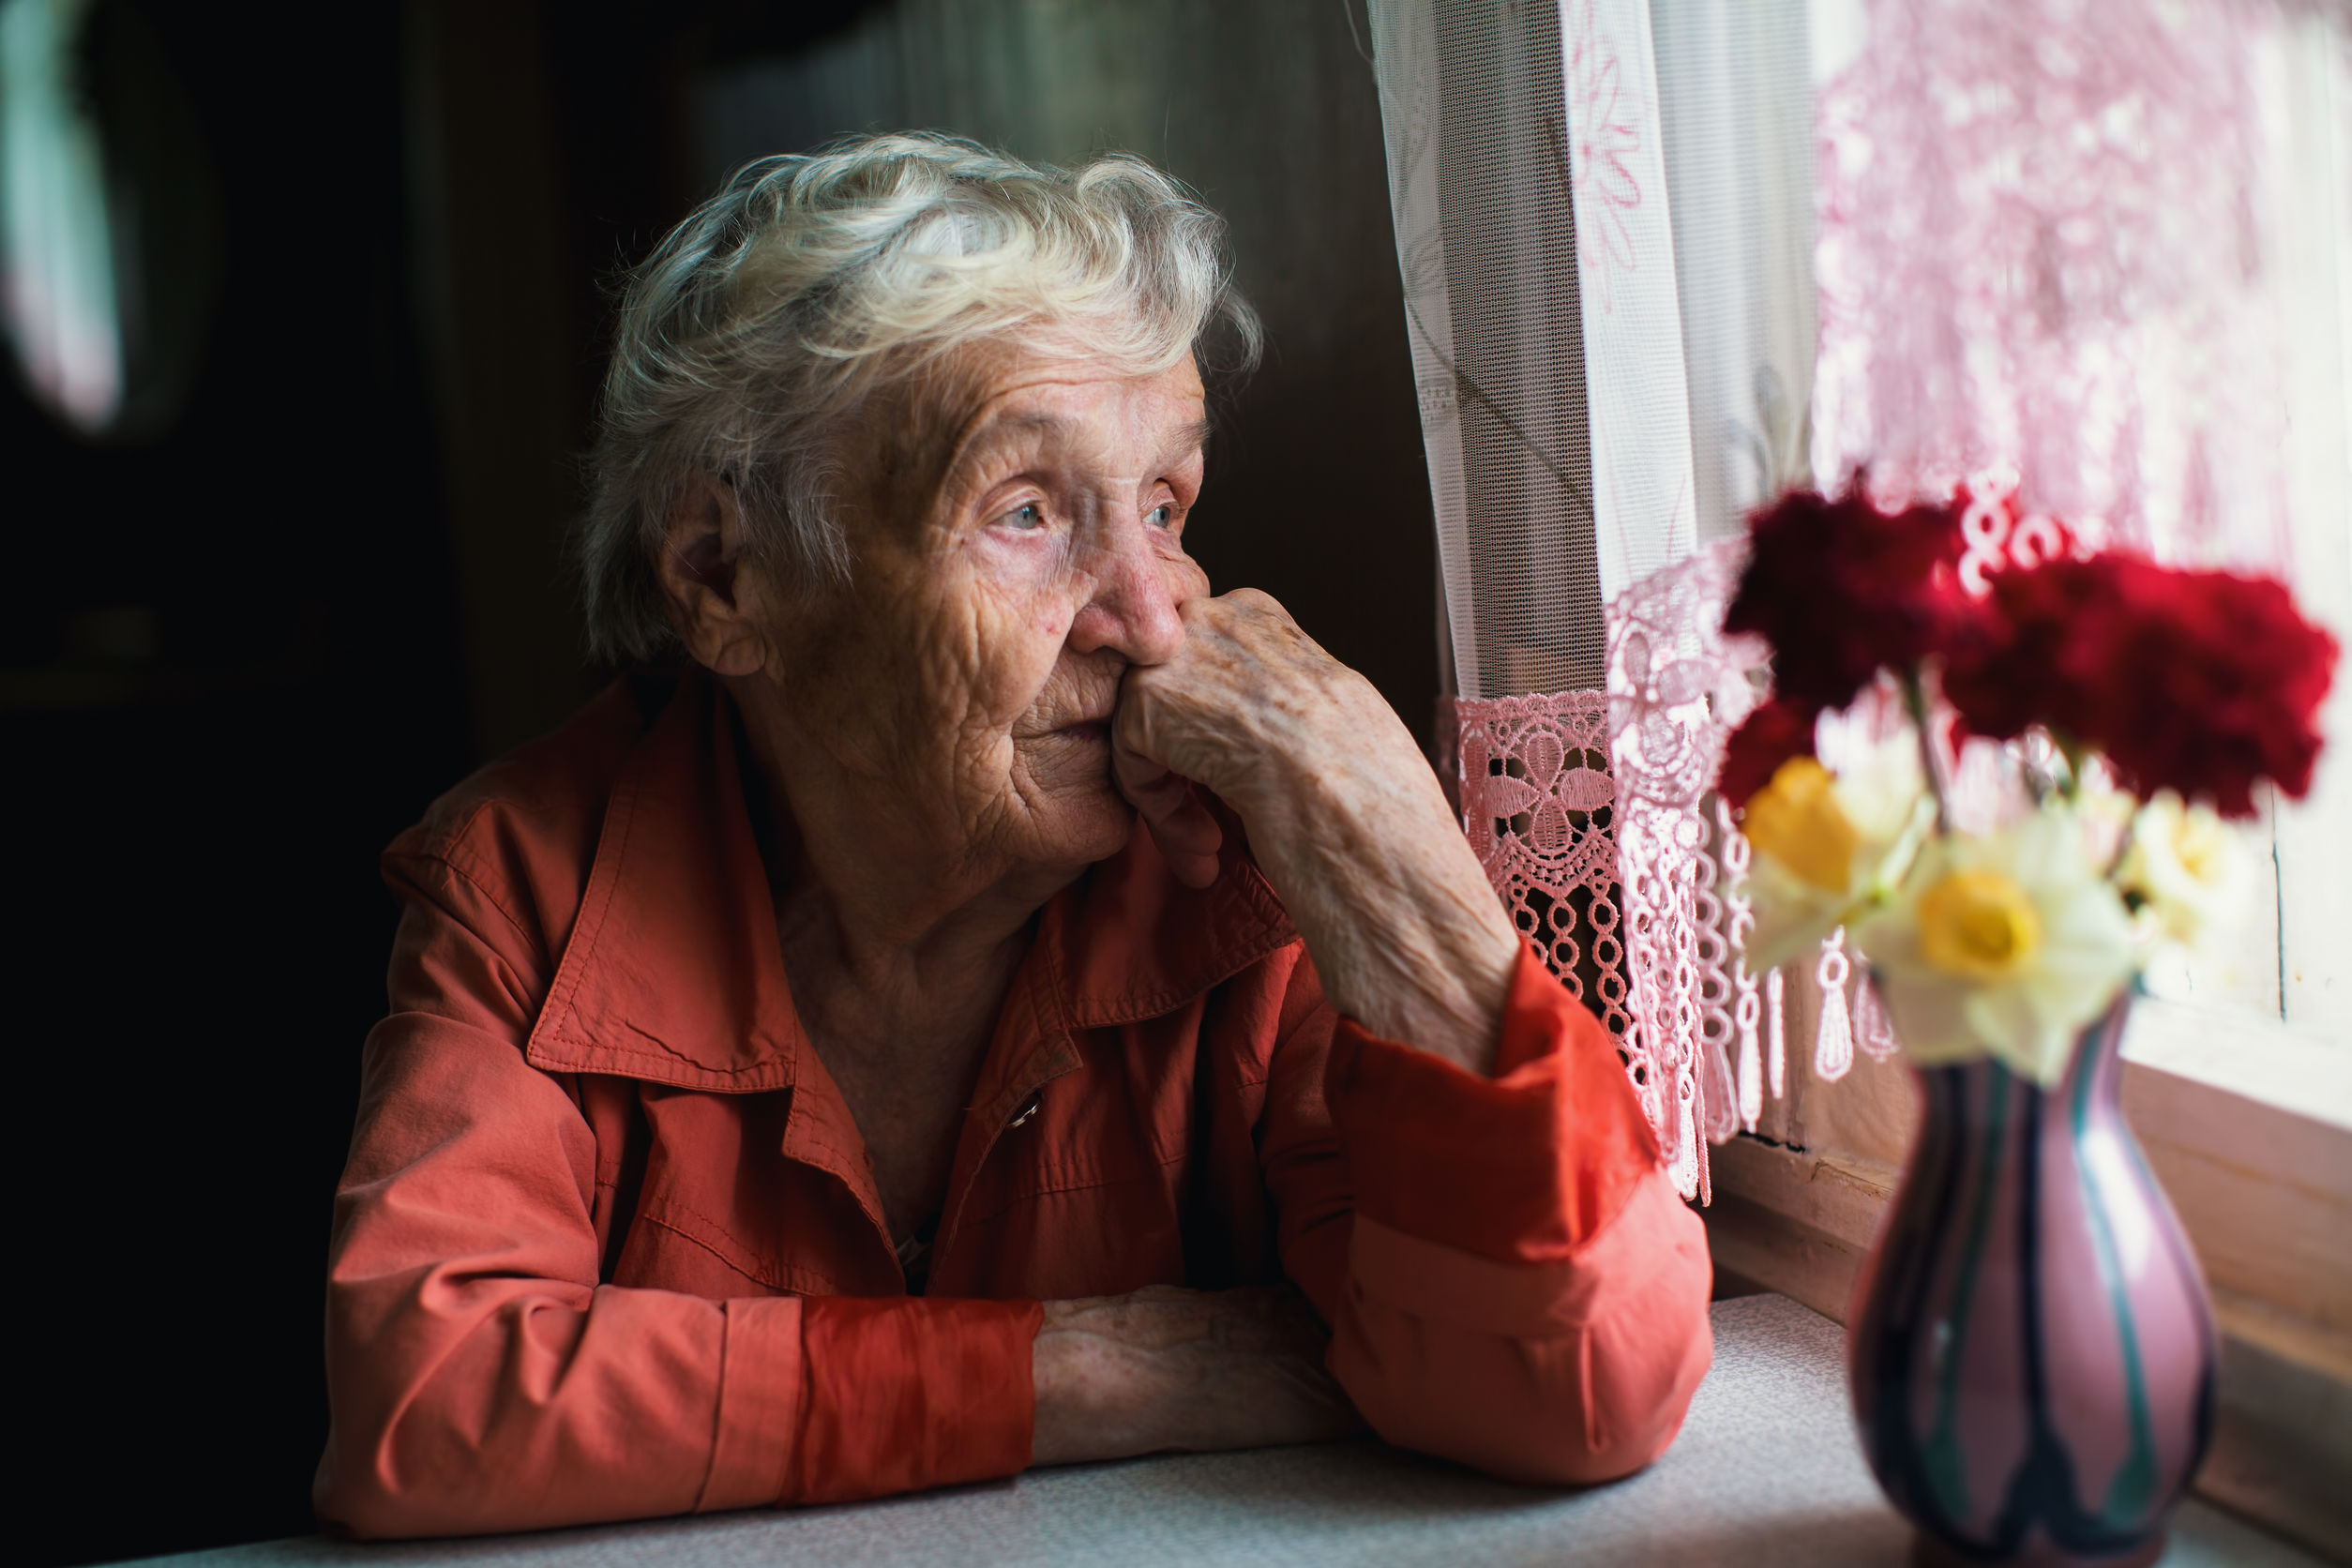 The Netherlands has largely cut back on institutional care for the elderly, resulting in masses of lonely elderly people.